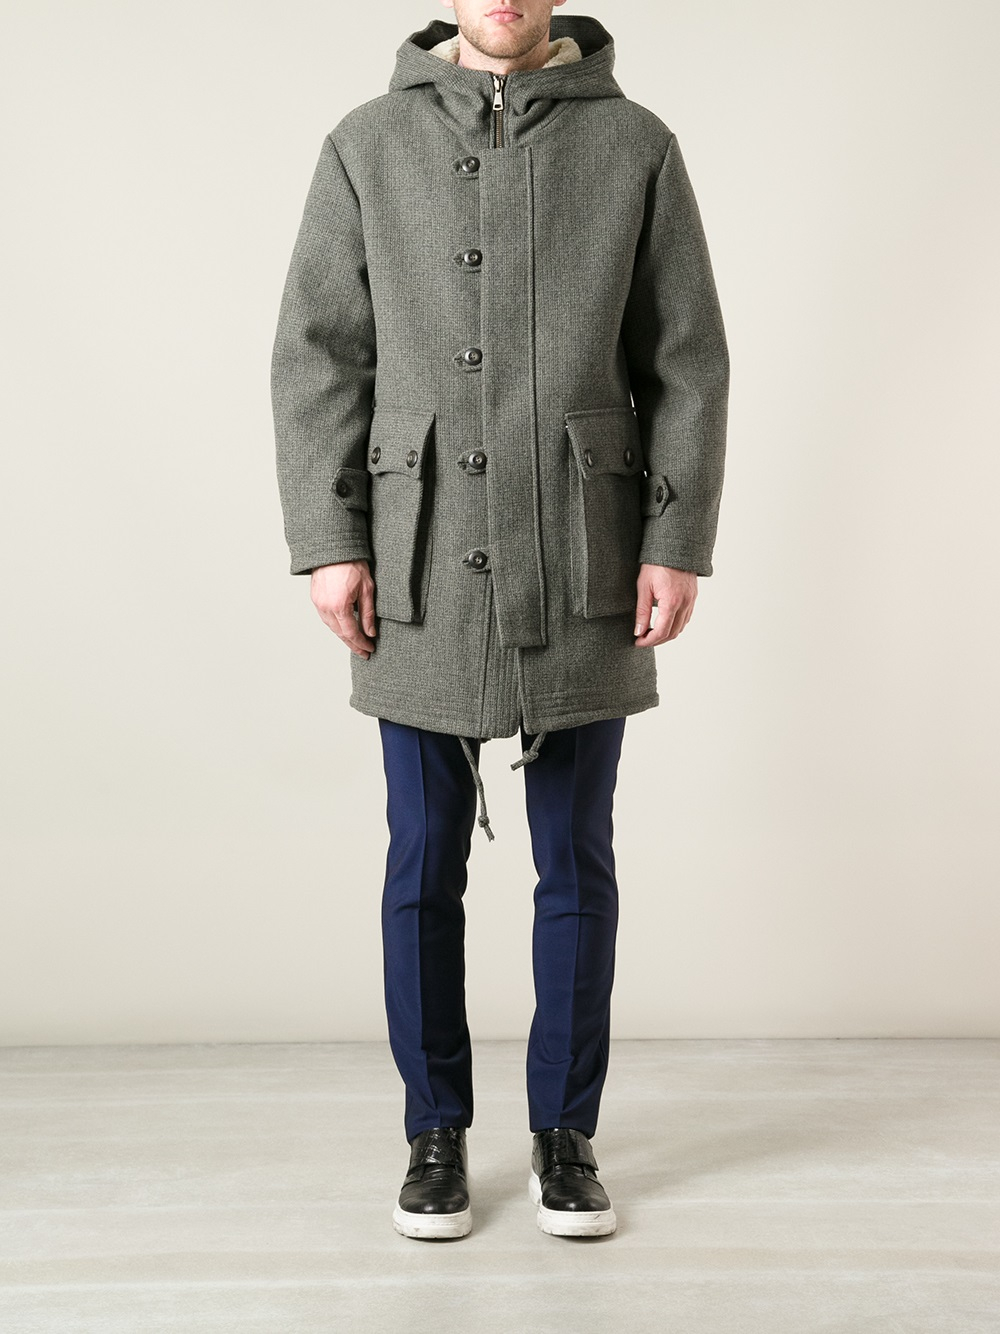 Lyst - Harnold Brook Fine Knit Parka Coat in Gray for Men